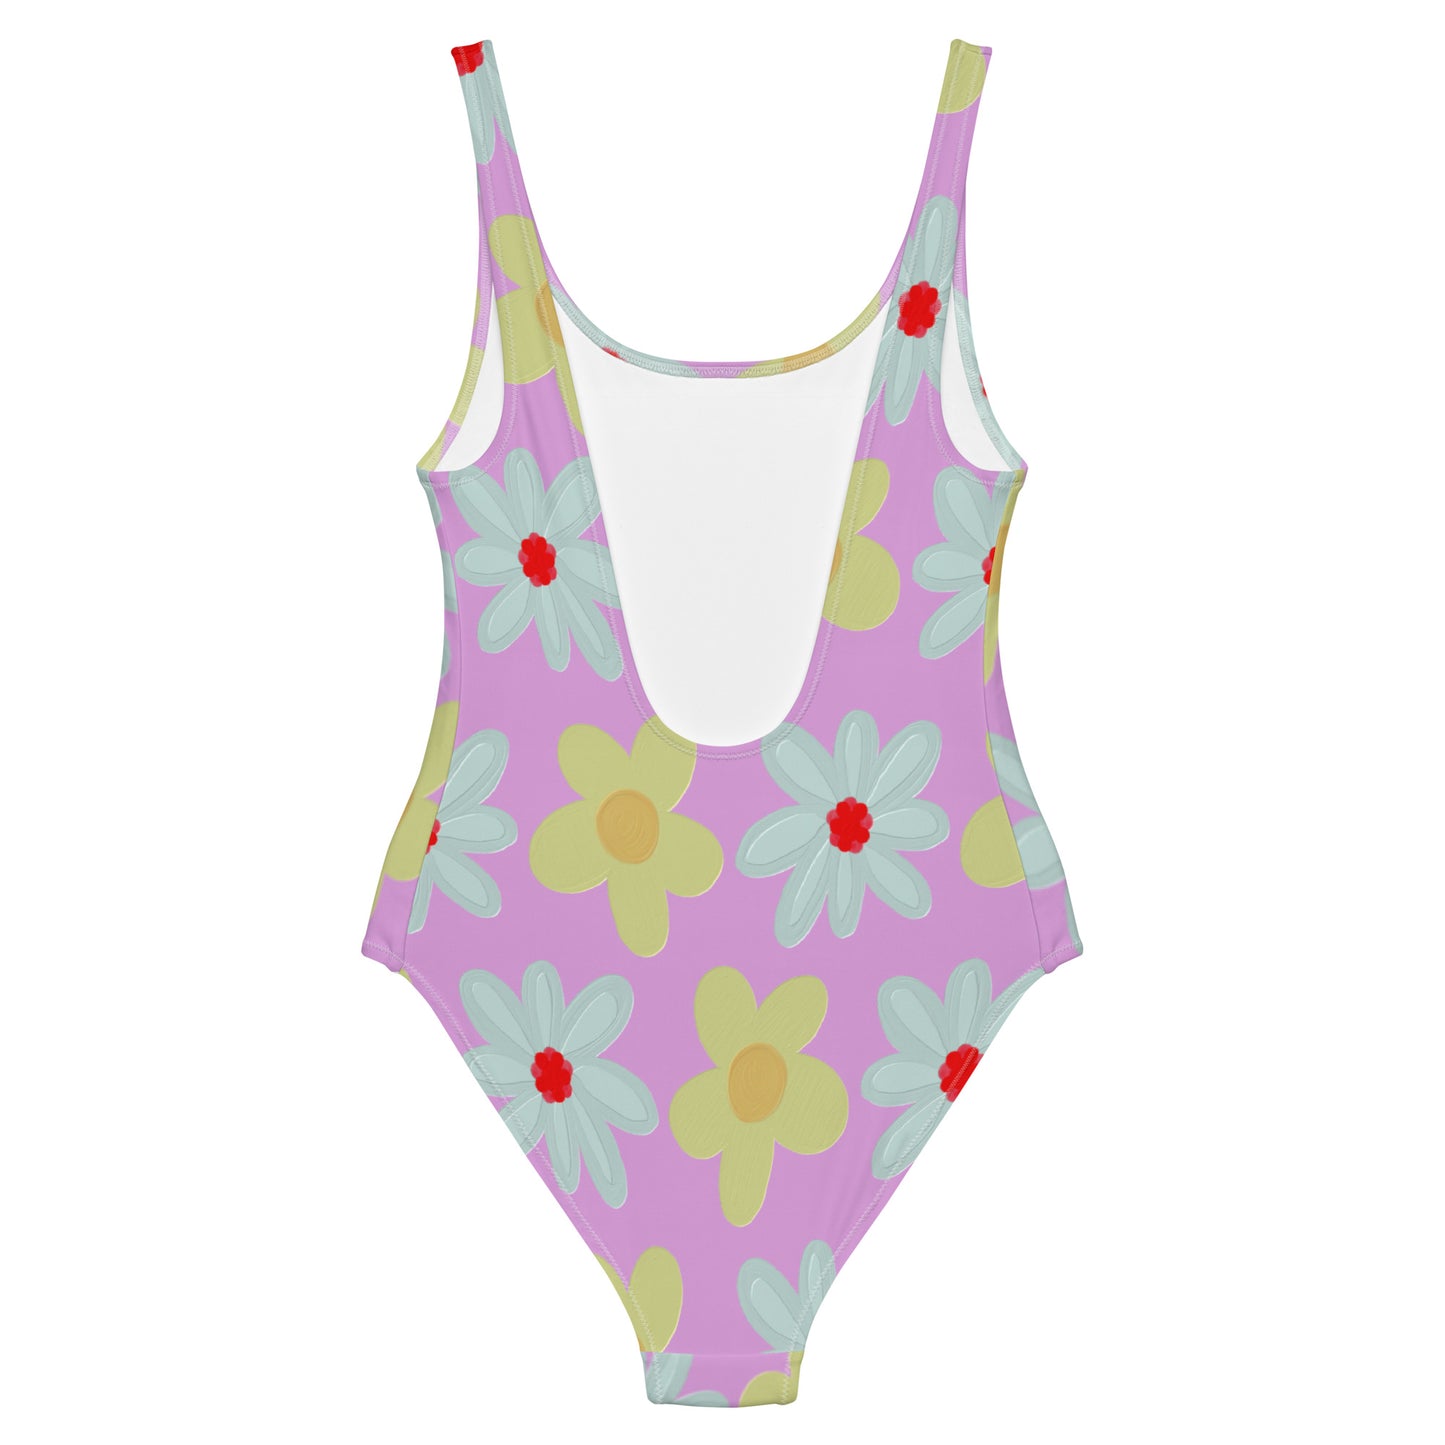 Spring 4 One-Piece Swimsuit